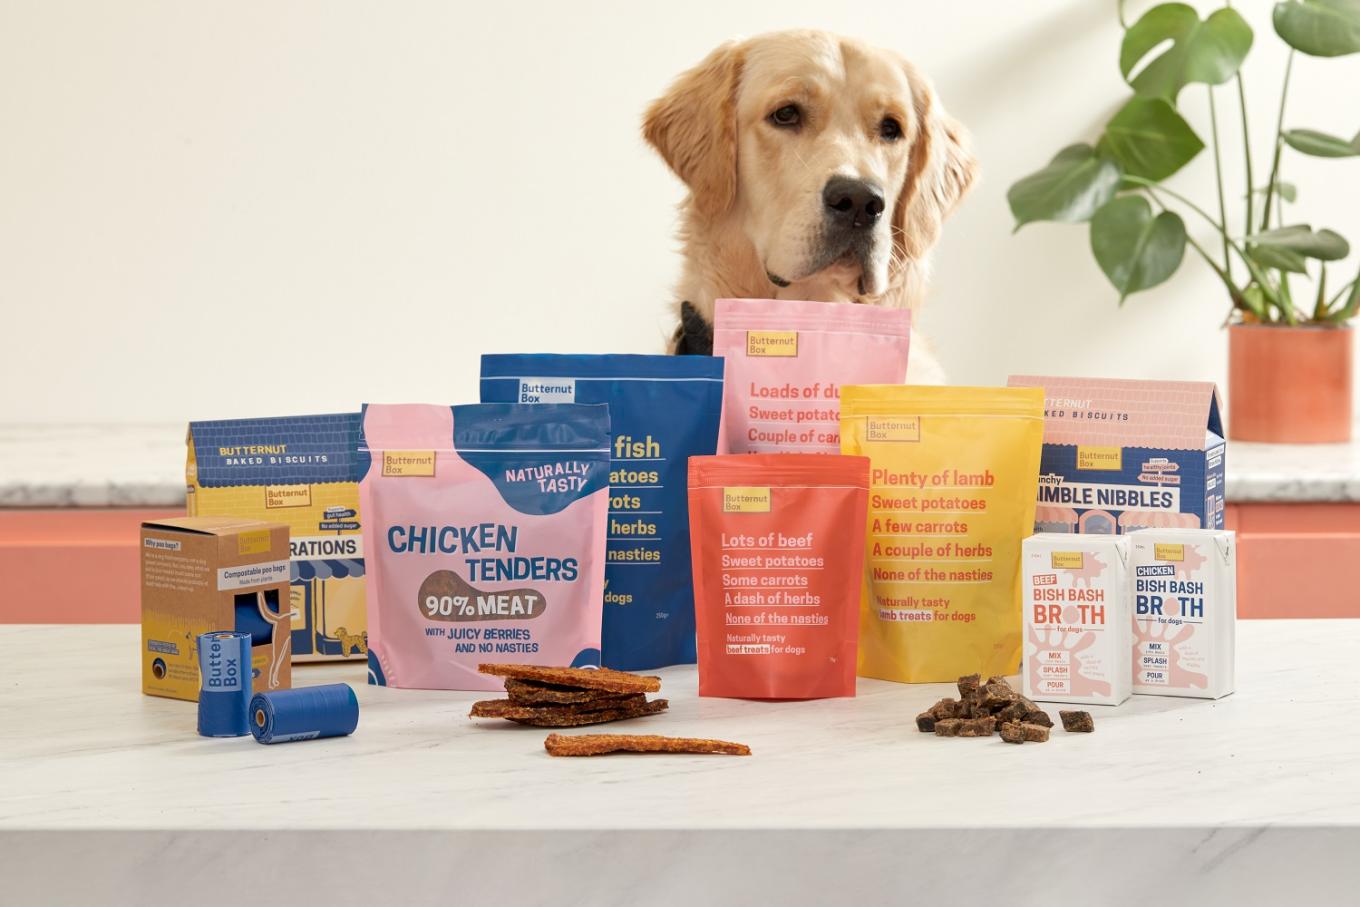 Image of Butternox products with dog